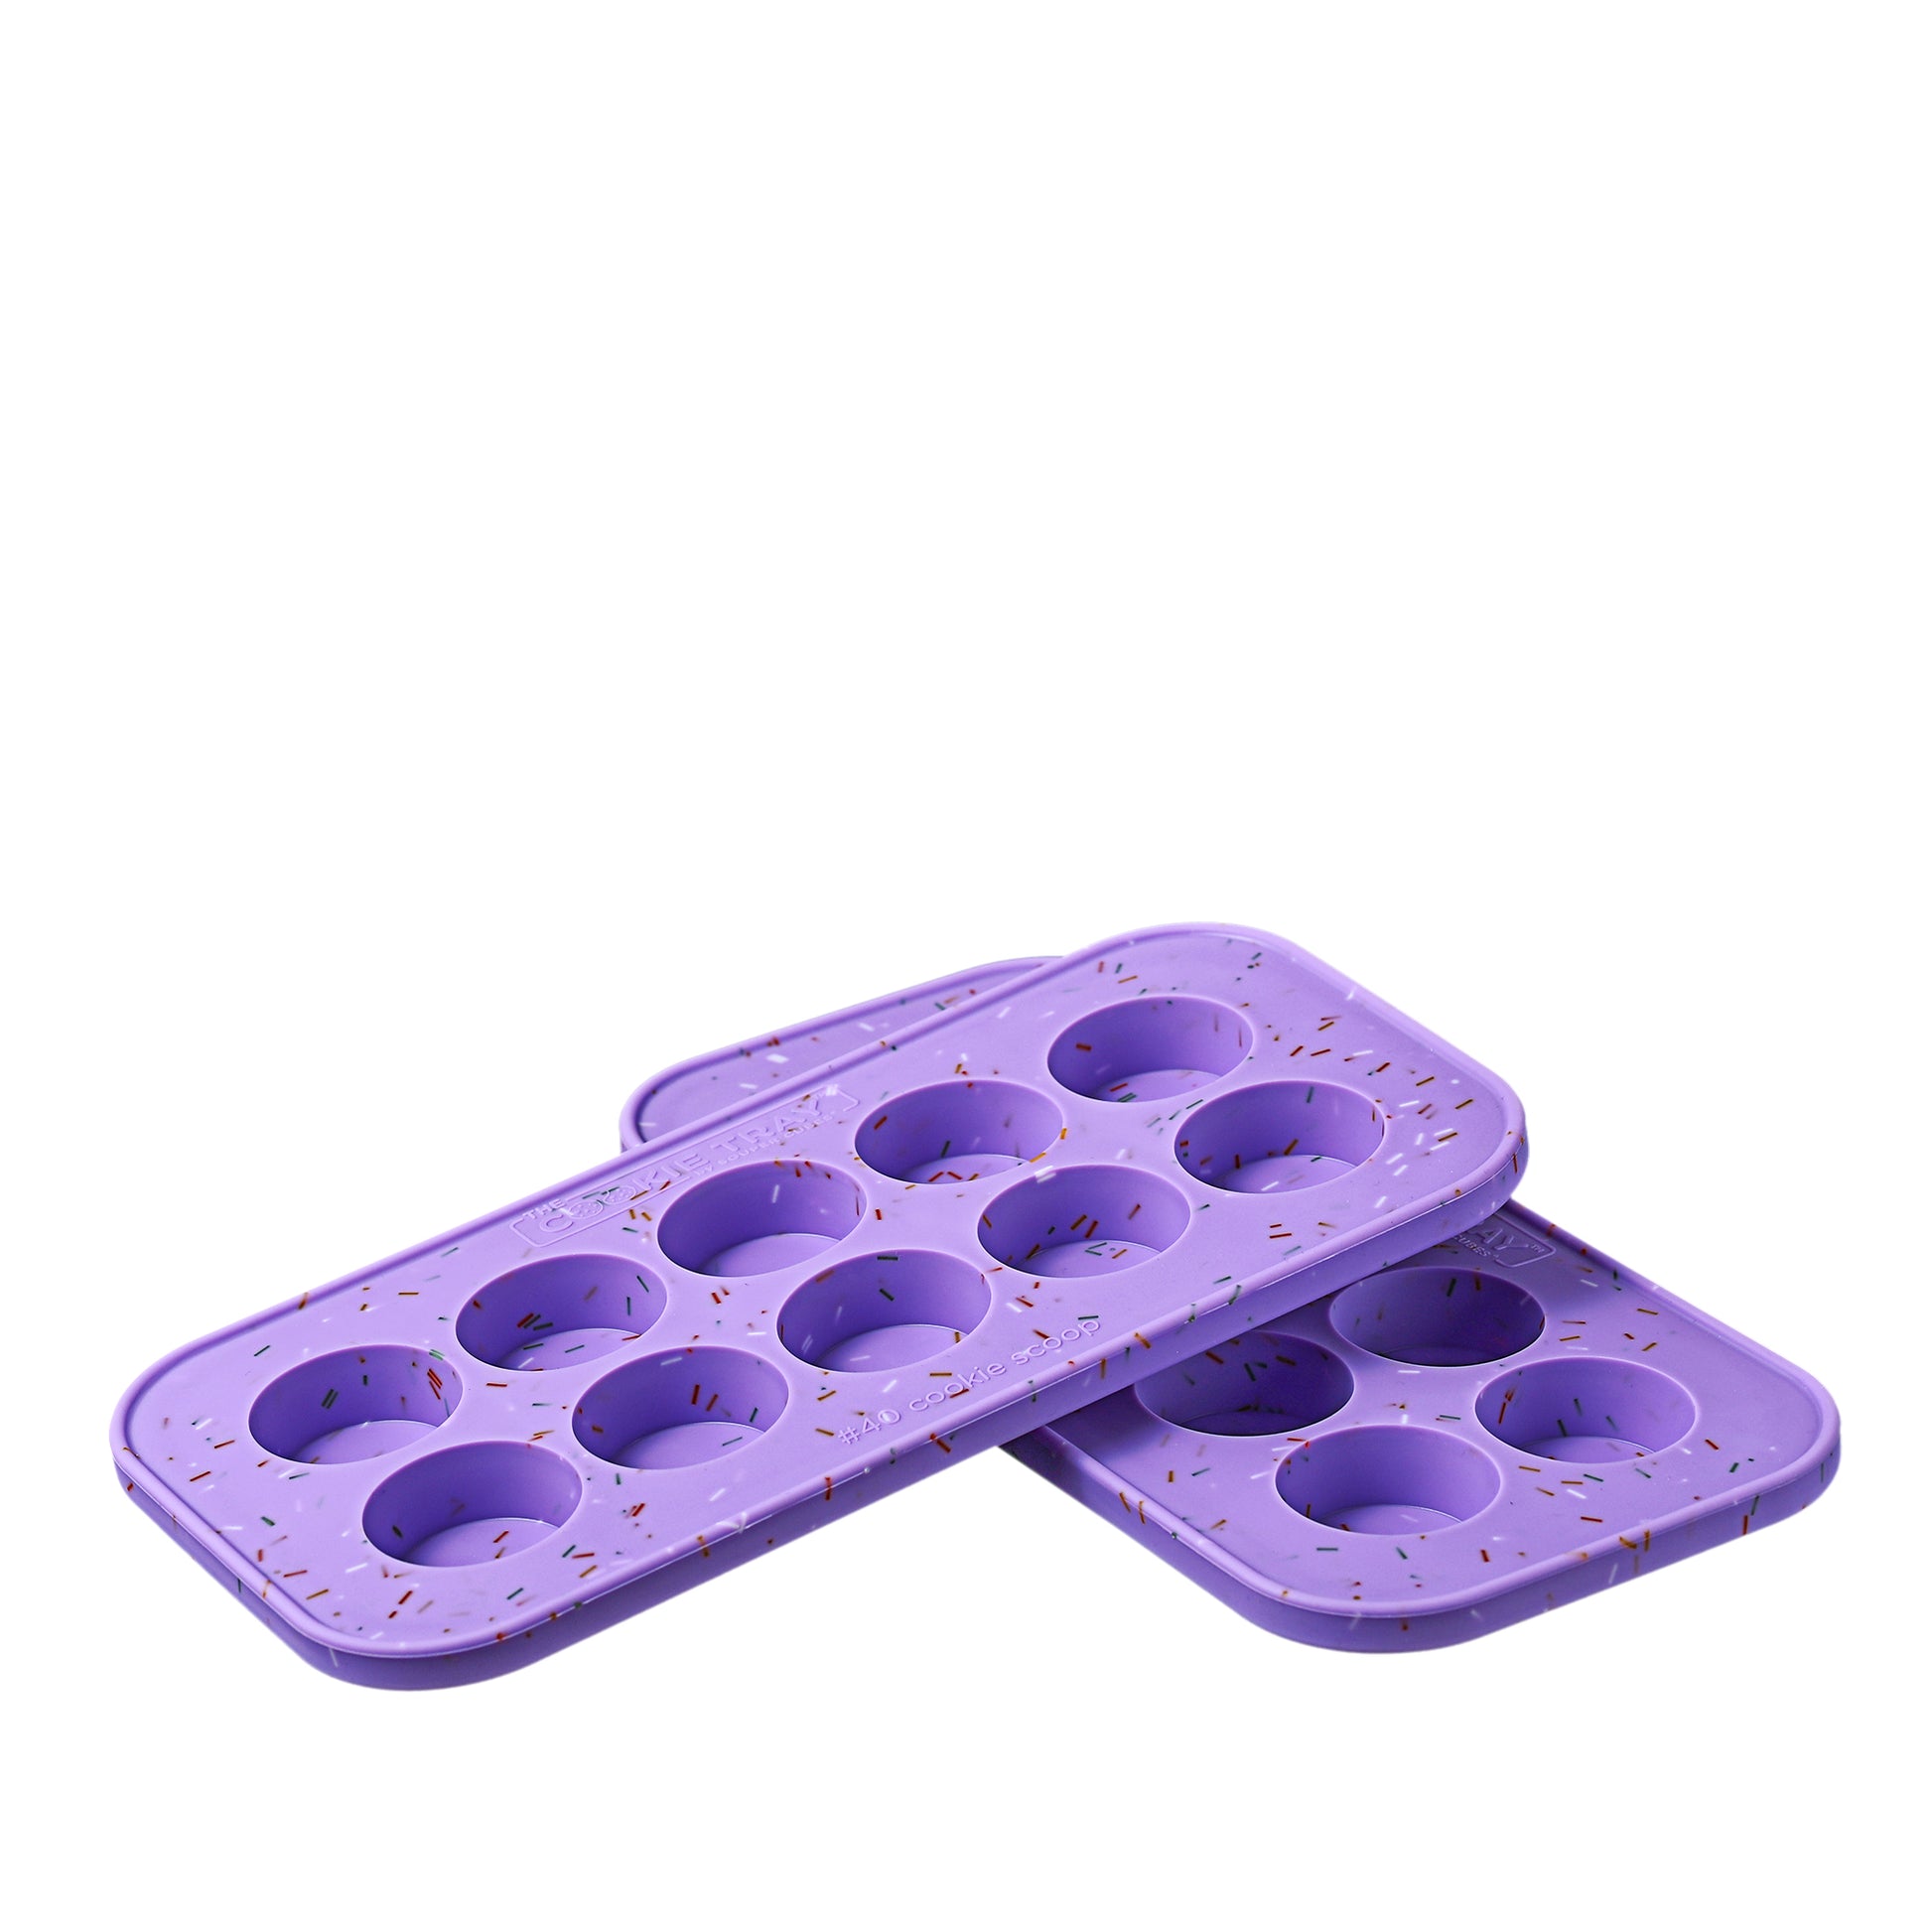 Souper Cubes Cookie Tray | Set of 2